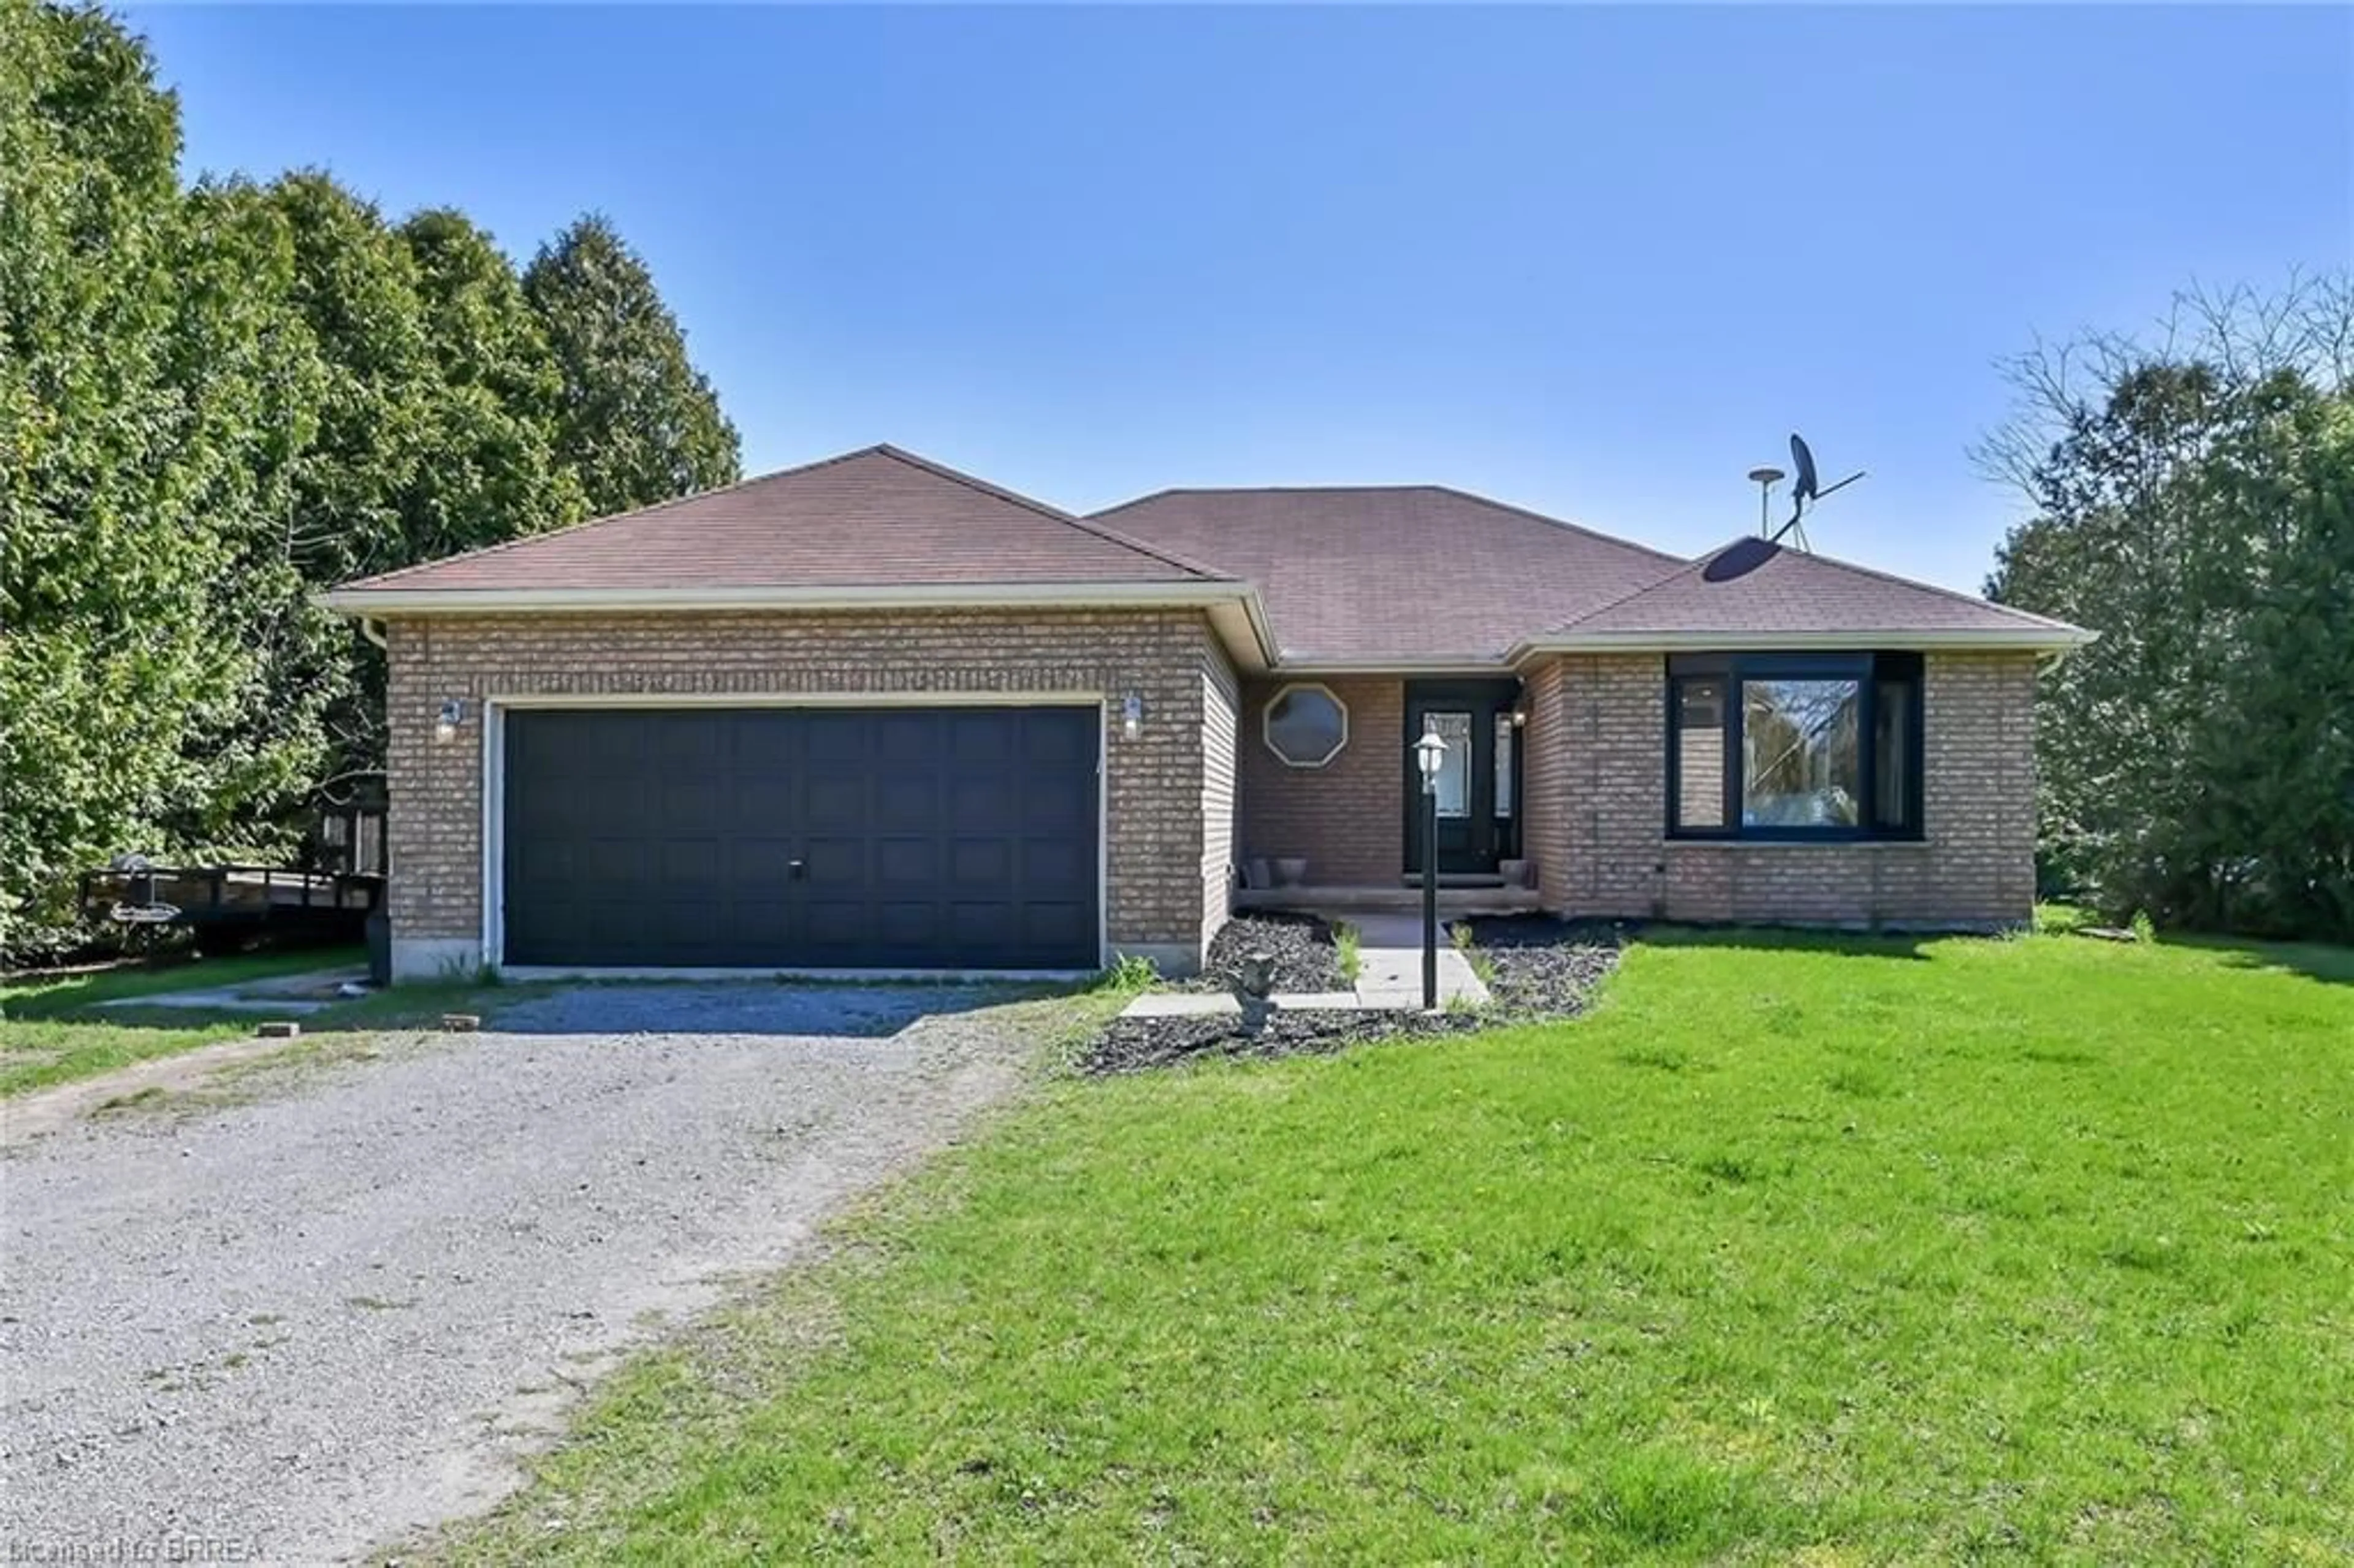 Home with brick exterior material for 1034 Cockshutt Rd, Simcoe Ontario N3Y 4K2